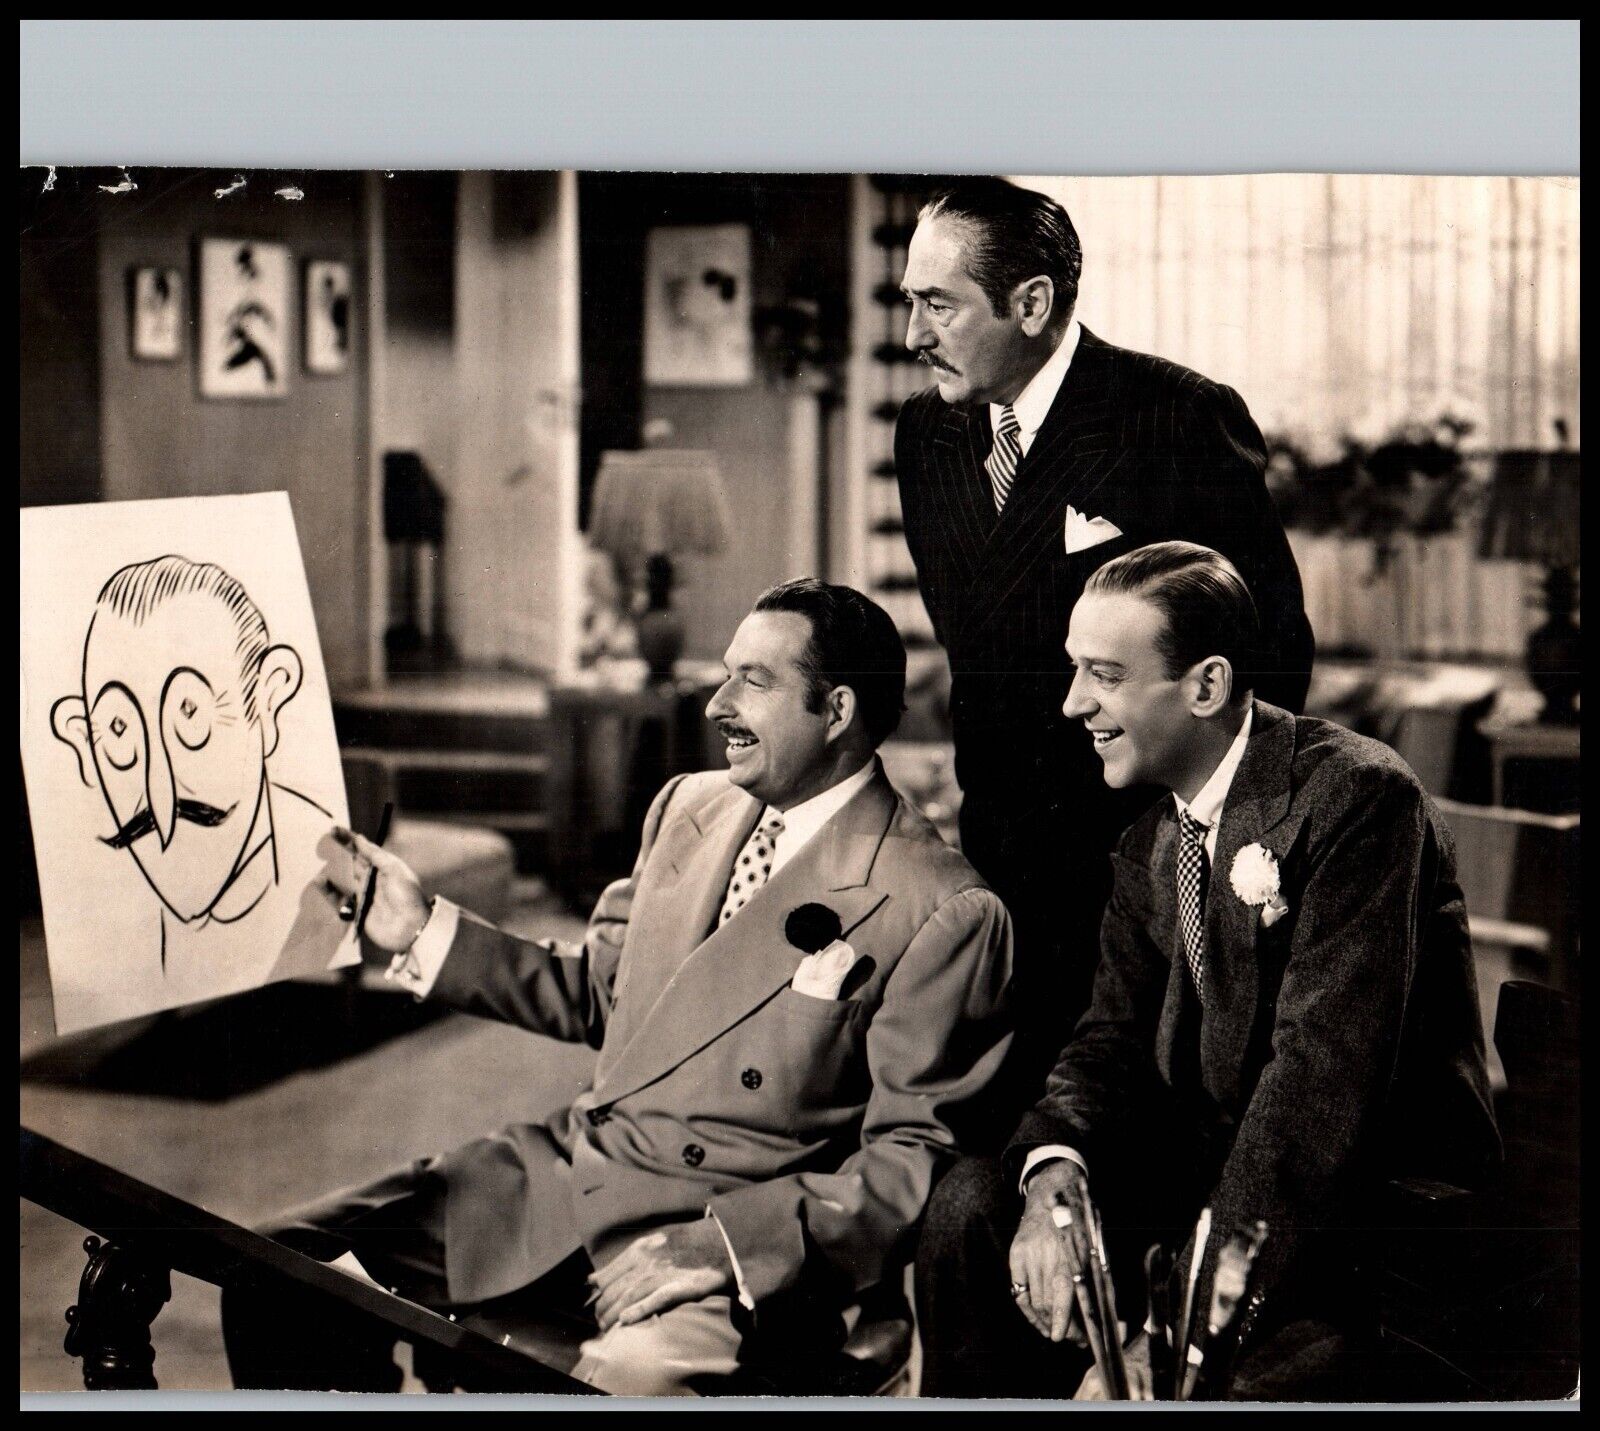 Fred Astaire + Adolphe Menjou + Xavier Cugat (1940s) ❤️ Photo by Lippman K 513